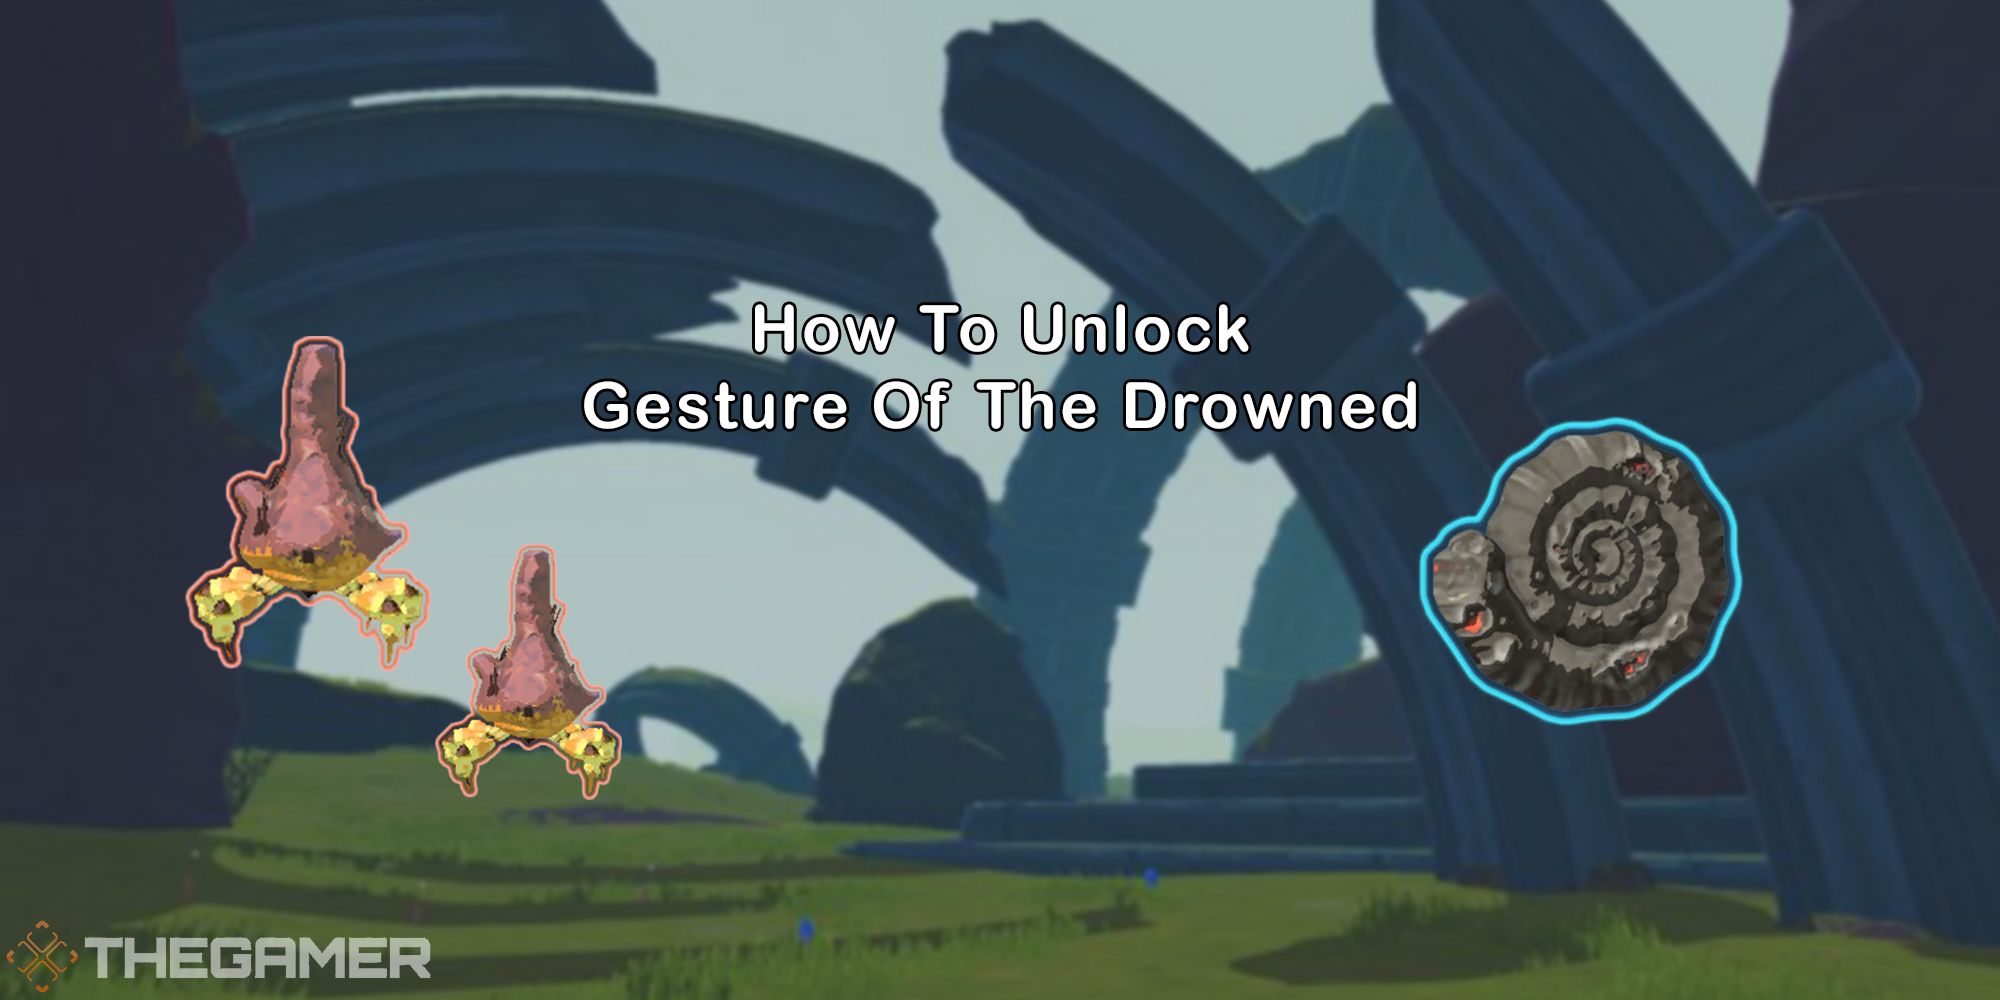 Gesture of the drowned unlock featured image